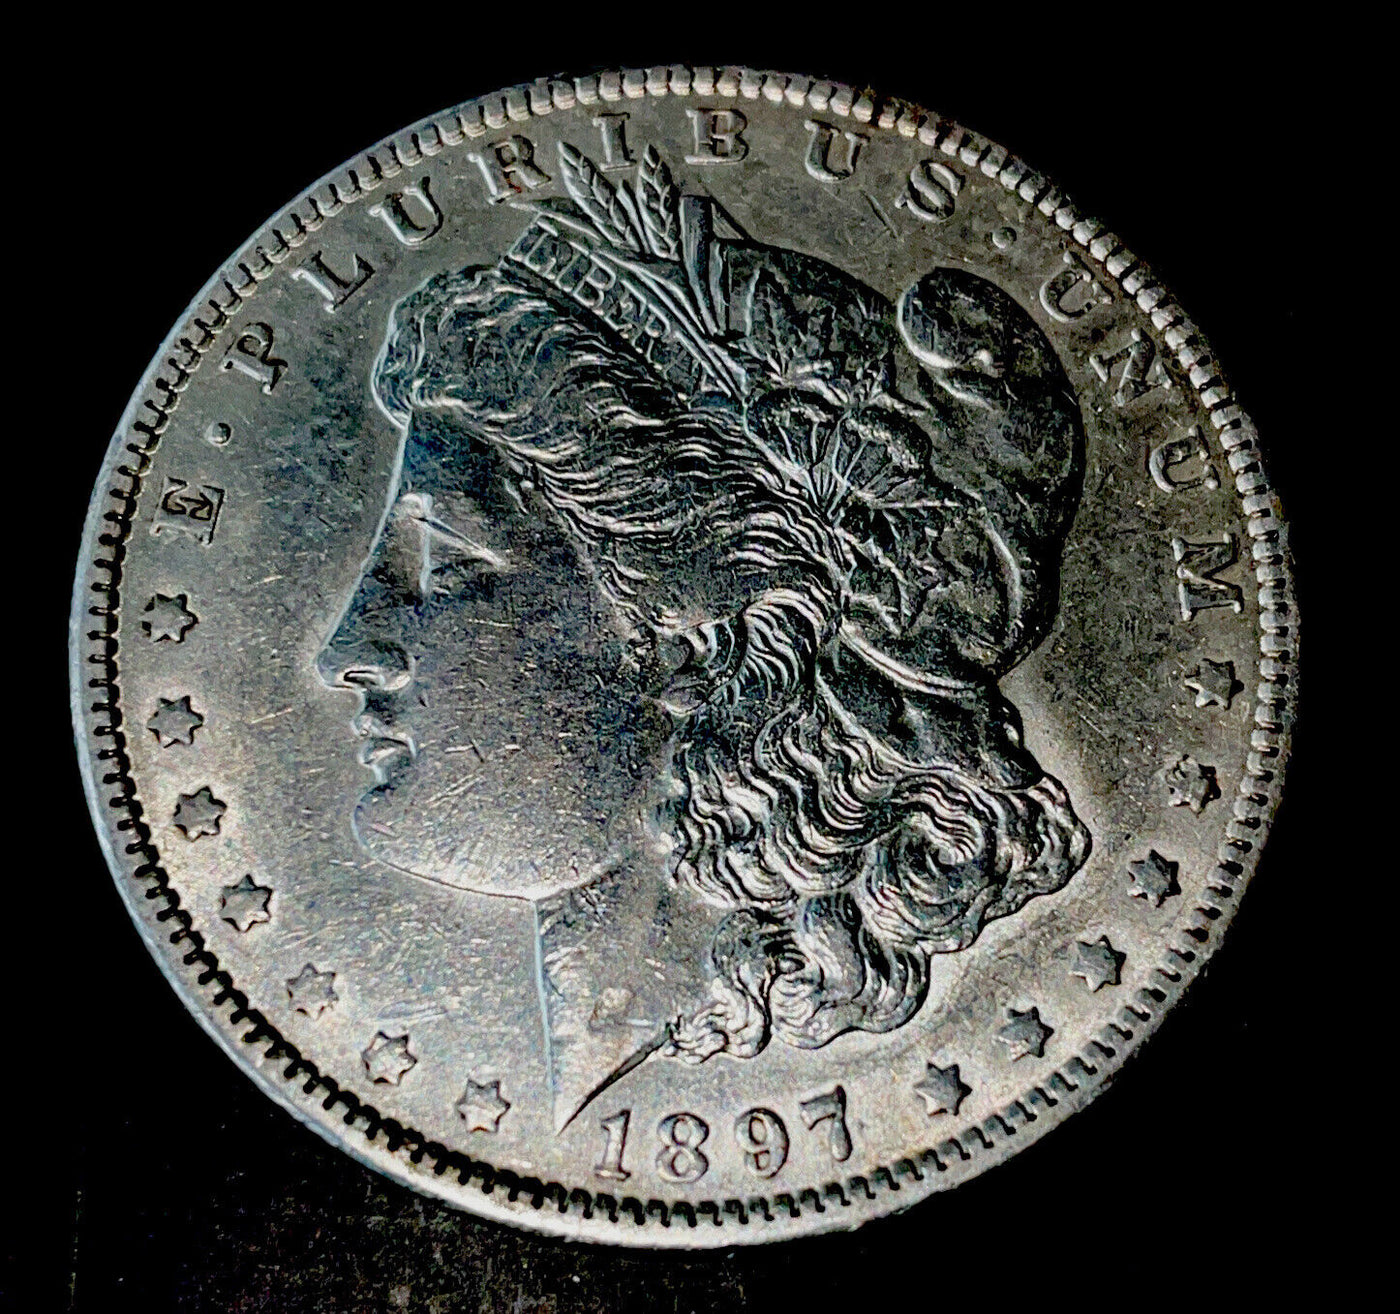 Scarce 1897 o Choice Almost Uncirculated $ nice overall look$$$